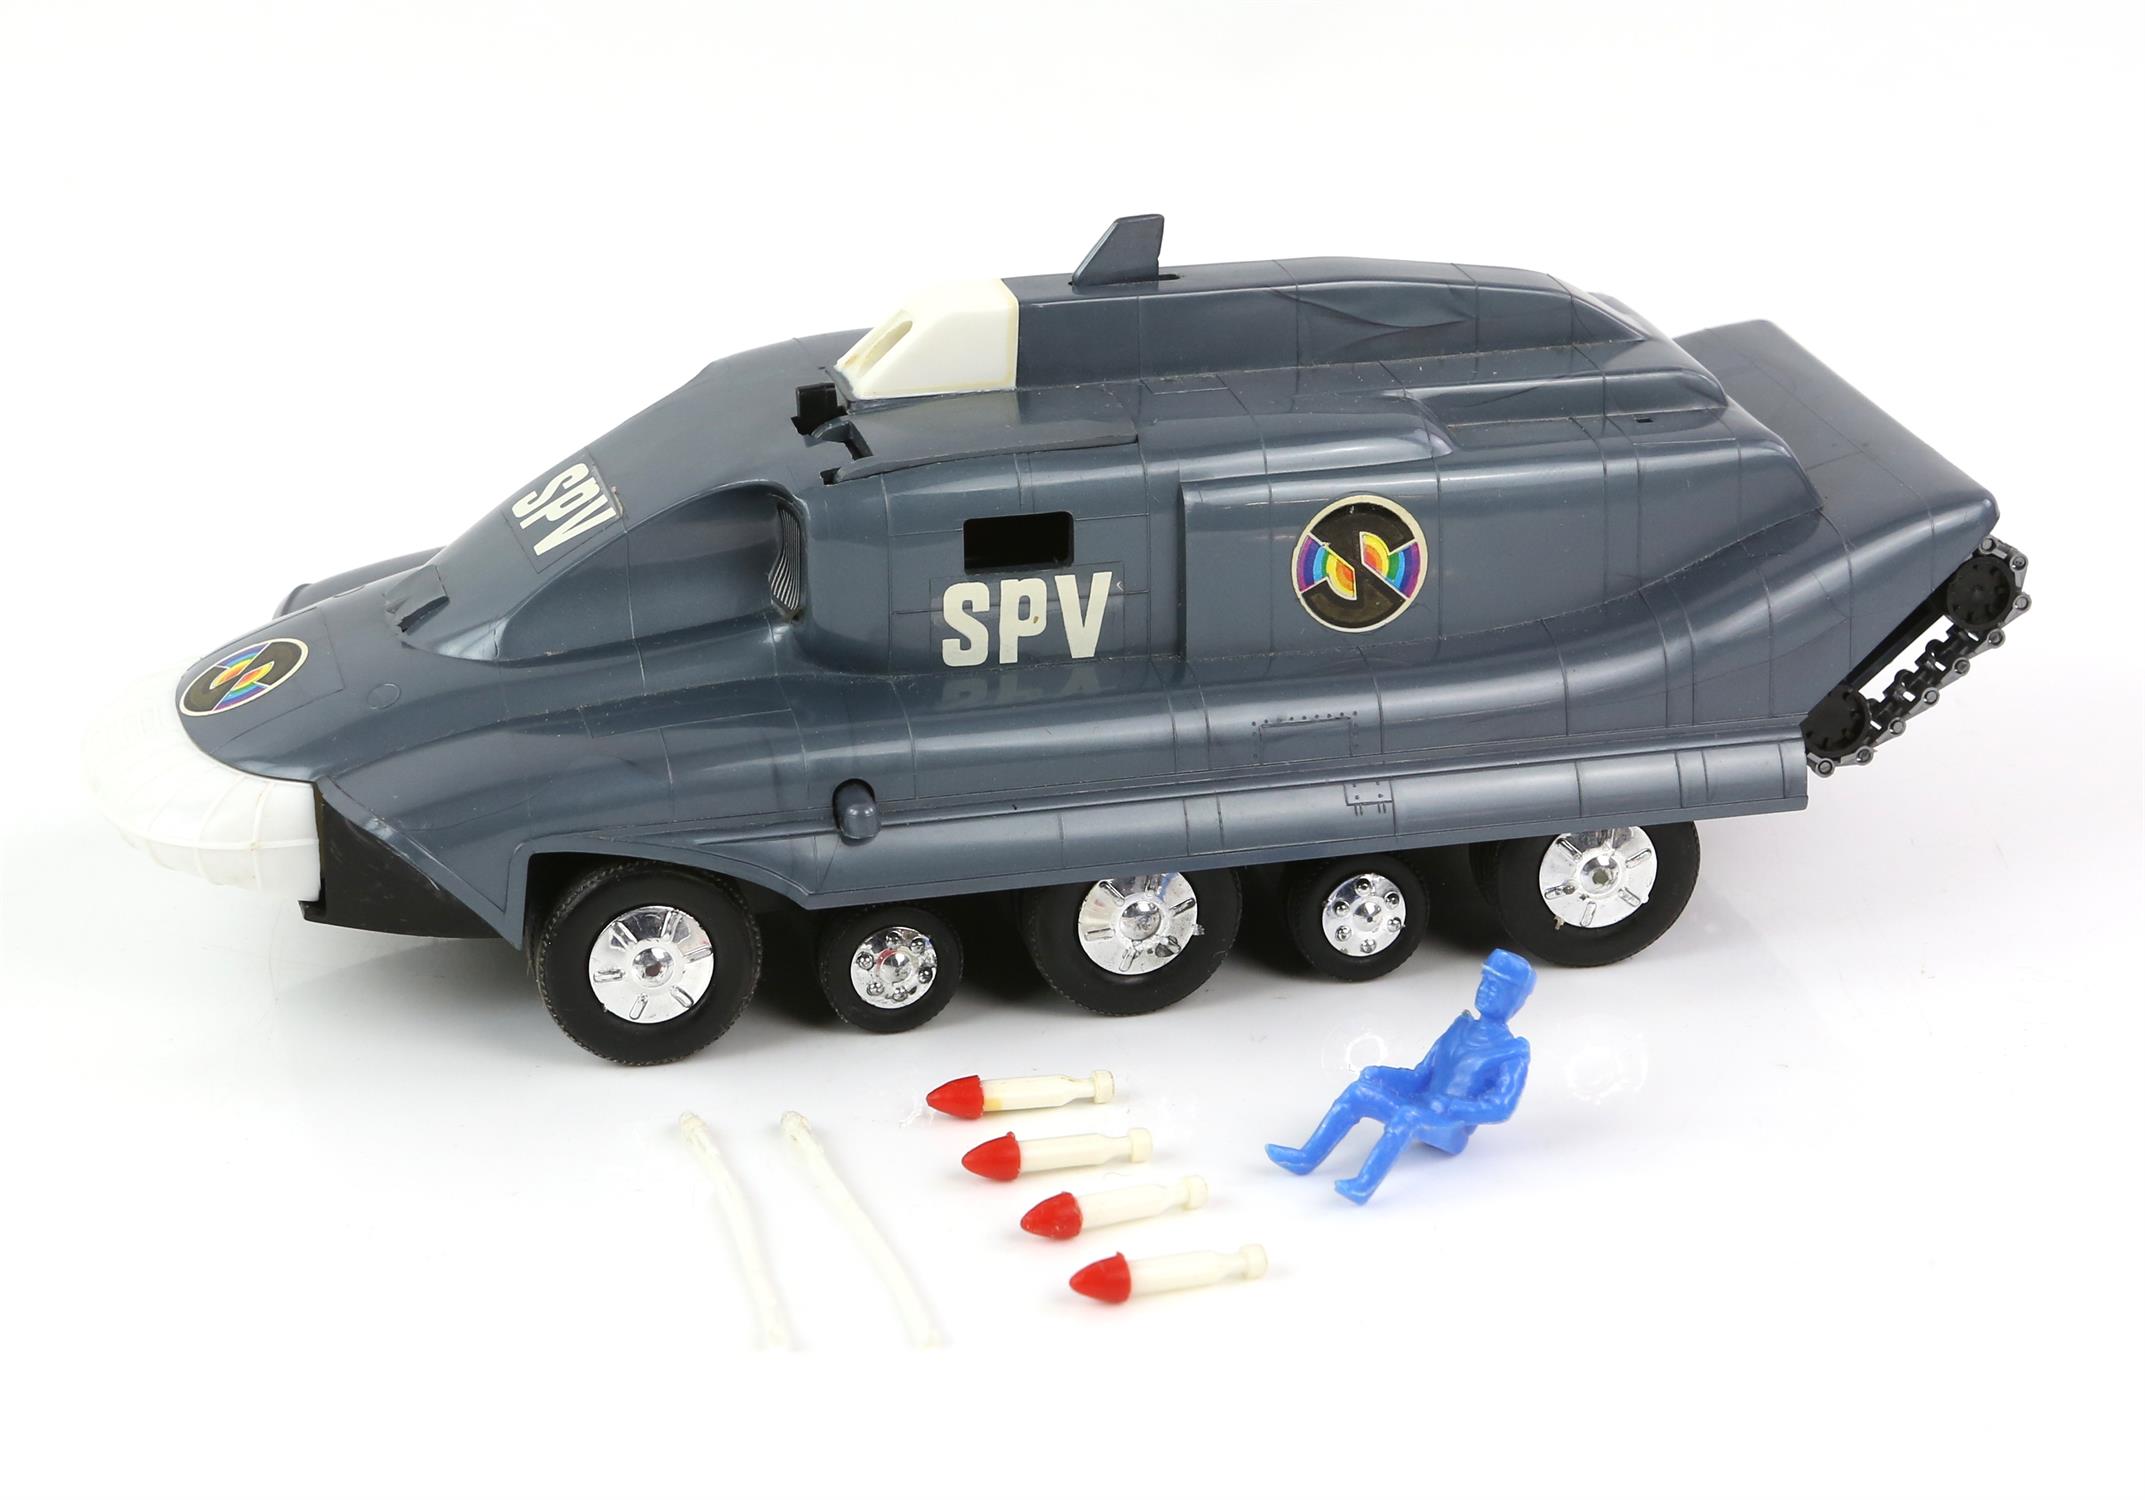 Captain Scarlet and the Mysterons - Century 21 Toys Gerry Anderson's Captain Scarlet and the - Image 15 of 22